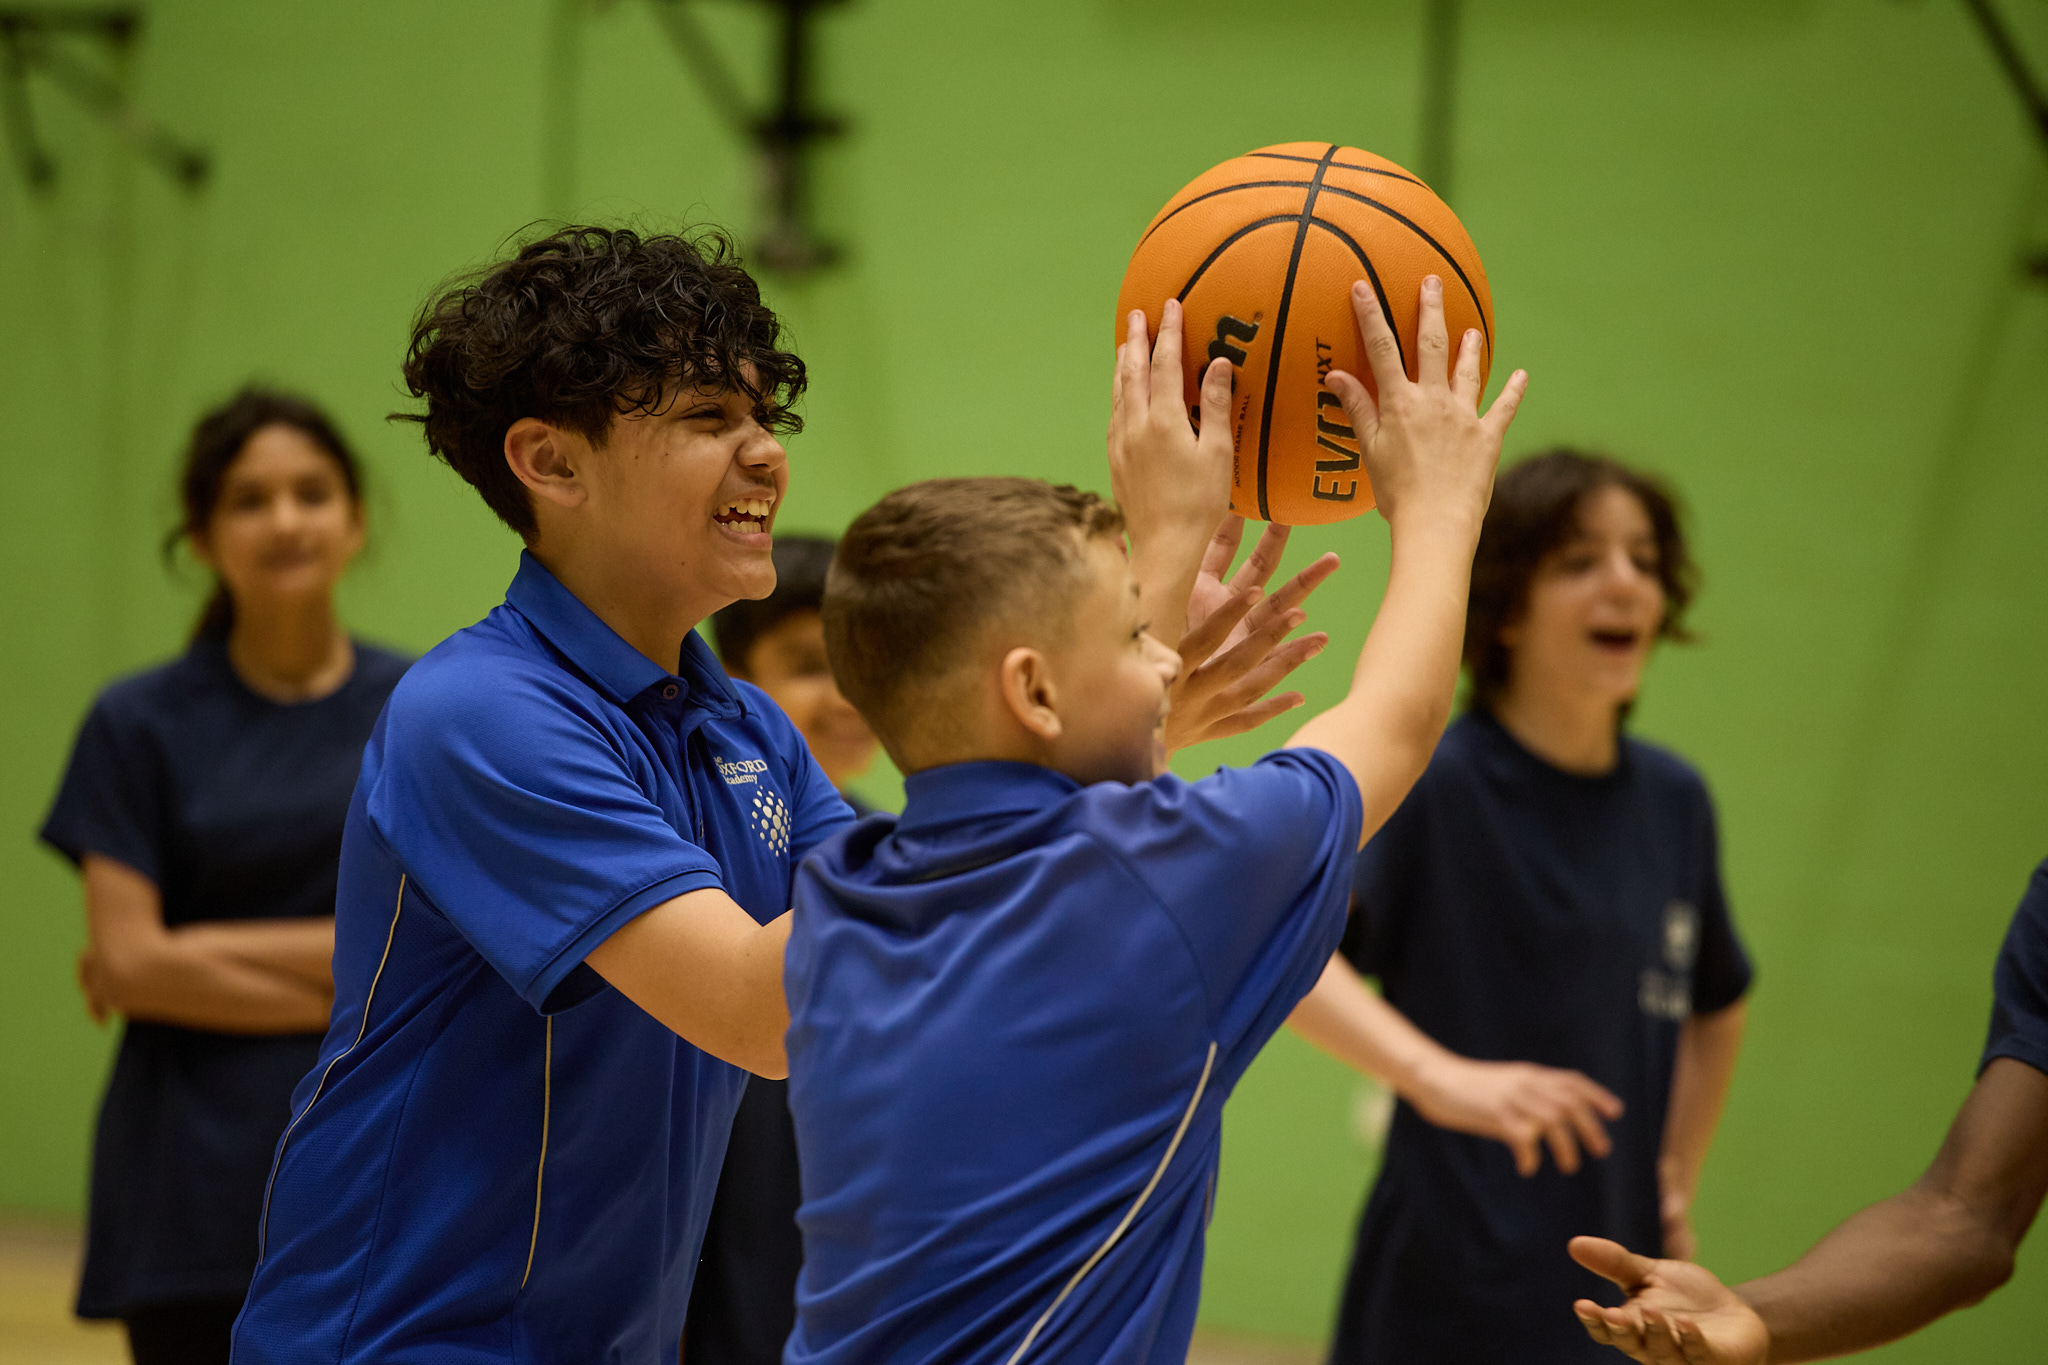 Pupils smiling reaching for ball in basketball practice